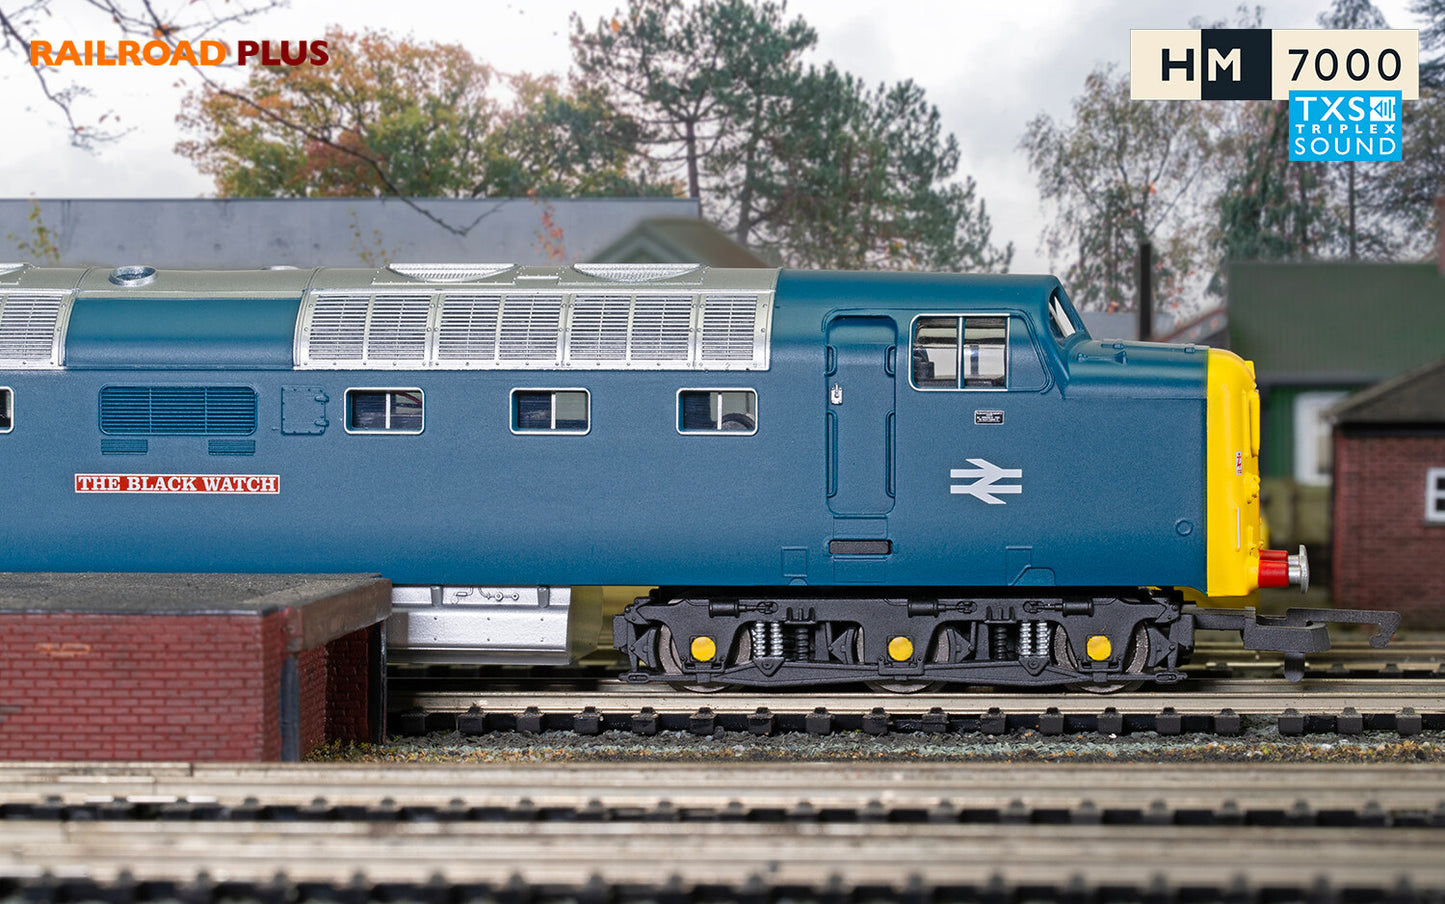 Hornby R30049TXS - Railroad Plus (enhanced Livery) BR Class 55 Co-Co 'The Black Witch' No. 55013 (WITH SOUND)